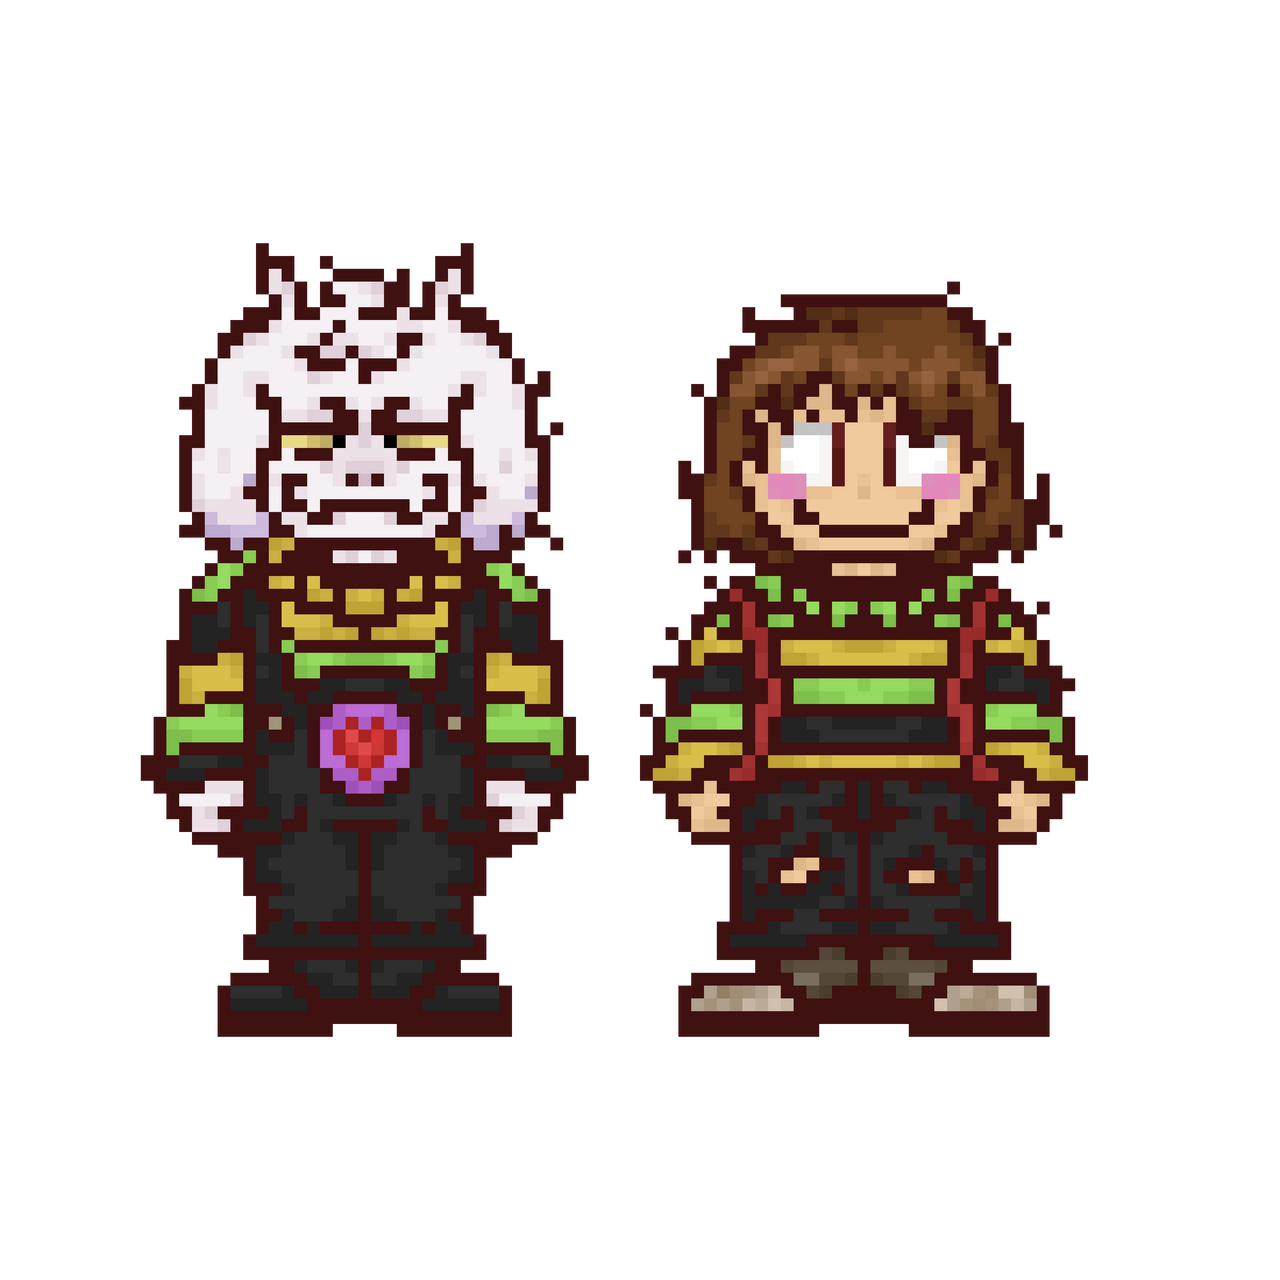 Pixilart - Chara UNDERTALE by Goldenflame2143